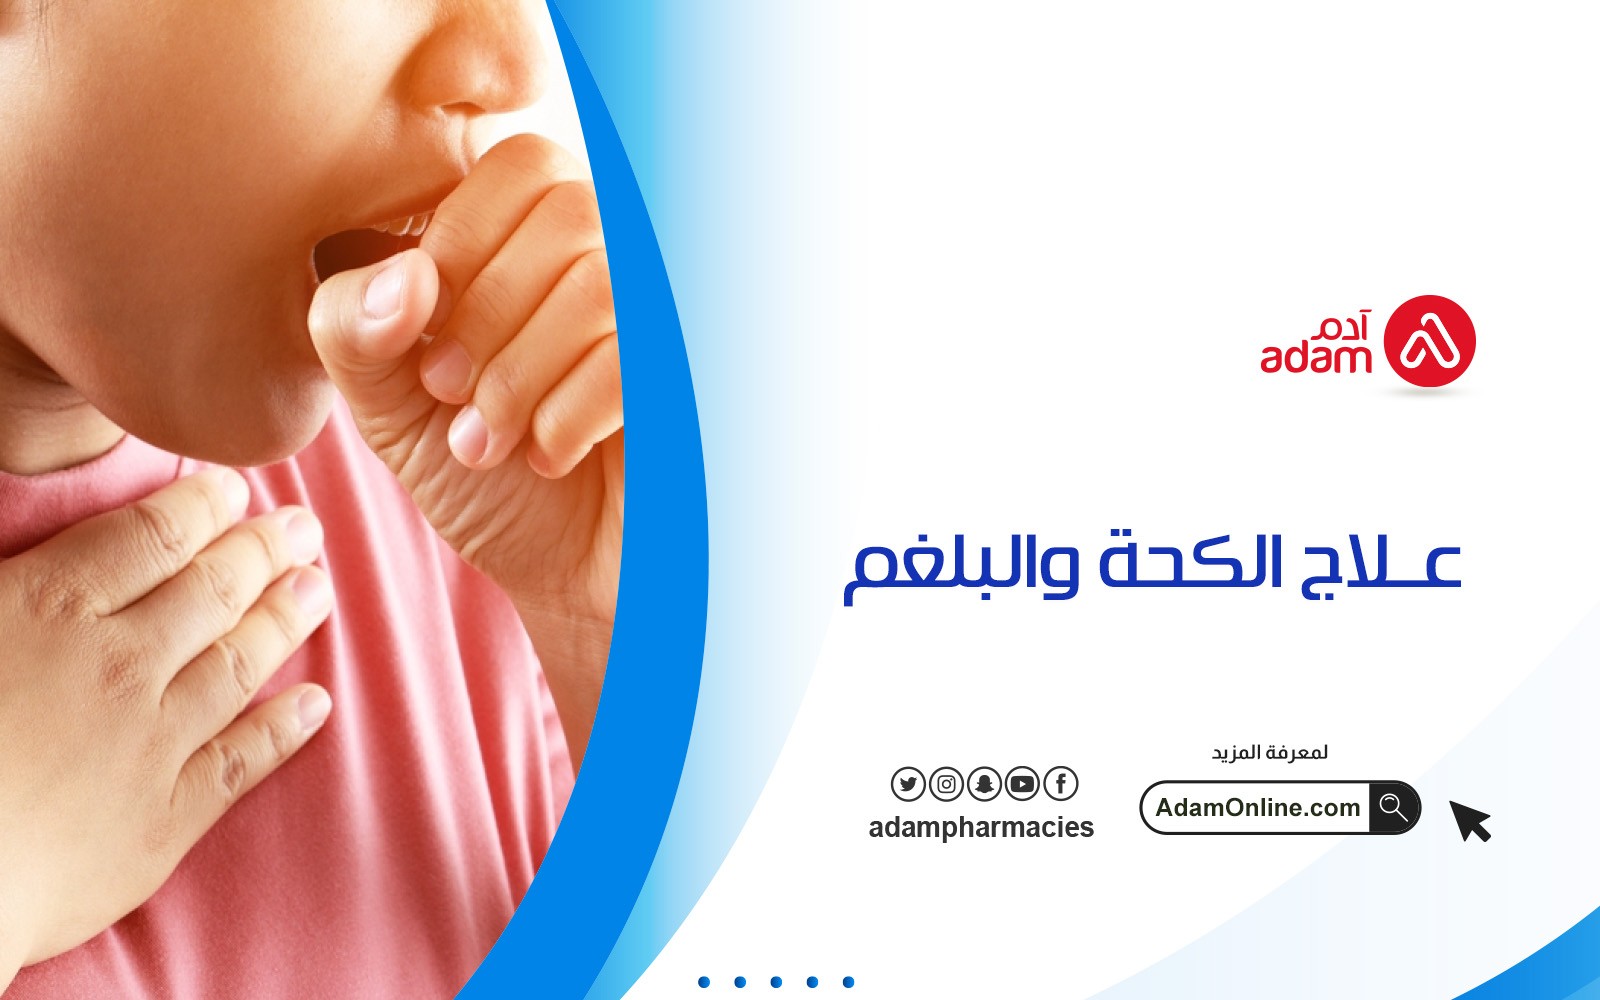 Treatment of cough and sputum